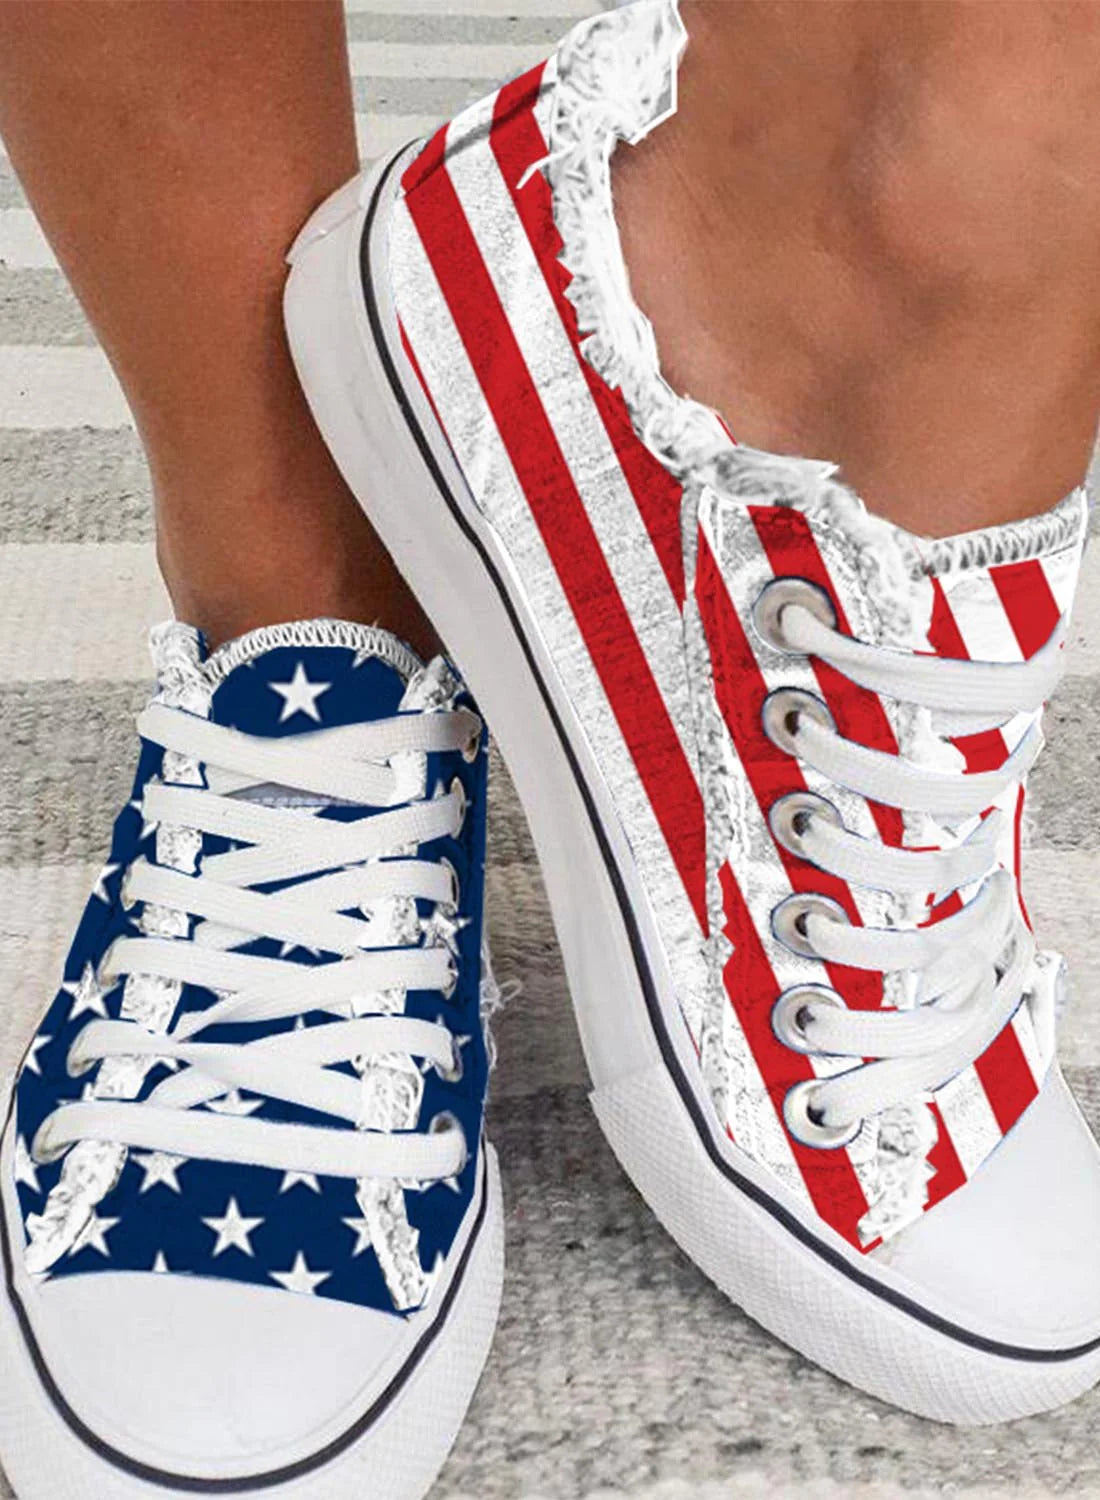 Women's Floral Lace-up Canvas Sneakers